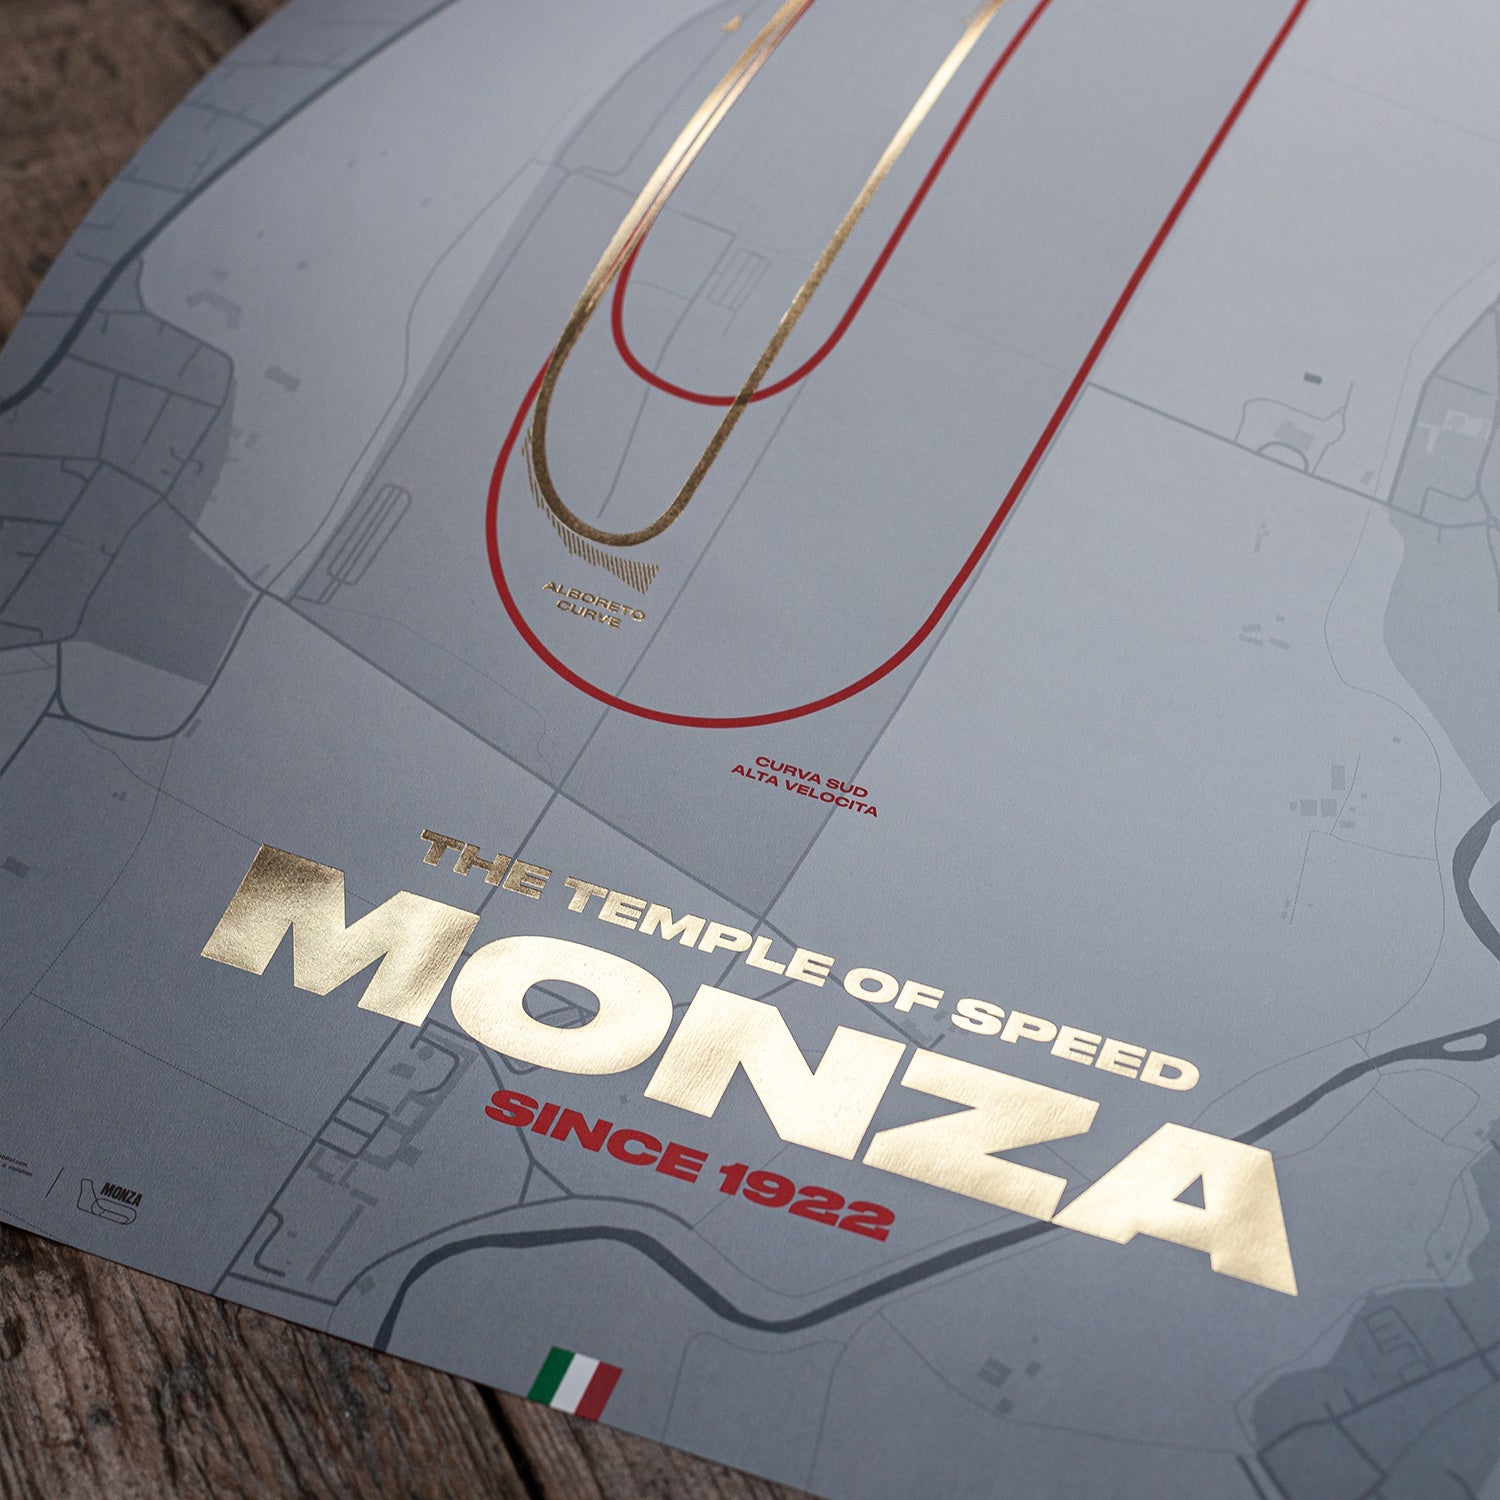 Monza Circuit - Track Evolution - The Temple of Speed